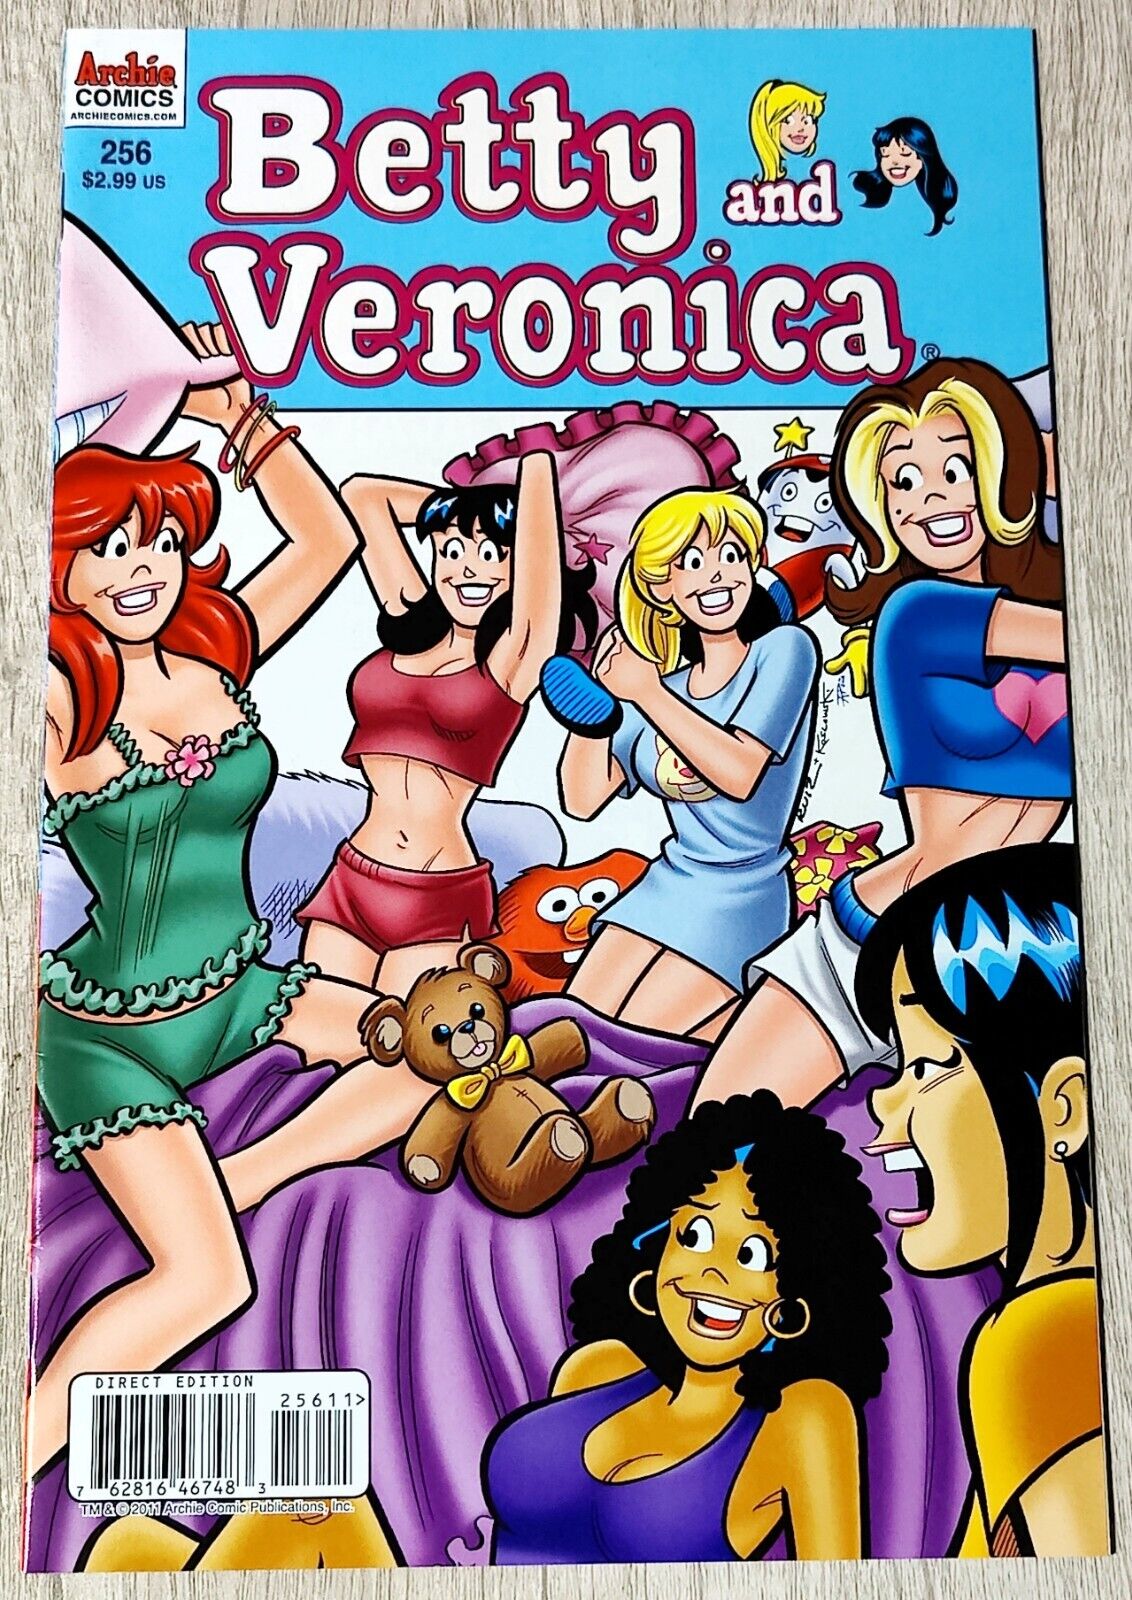 Betty & Veronica # 256 - Lingerie Slumber Party Pillow Fight Cover - NM